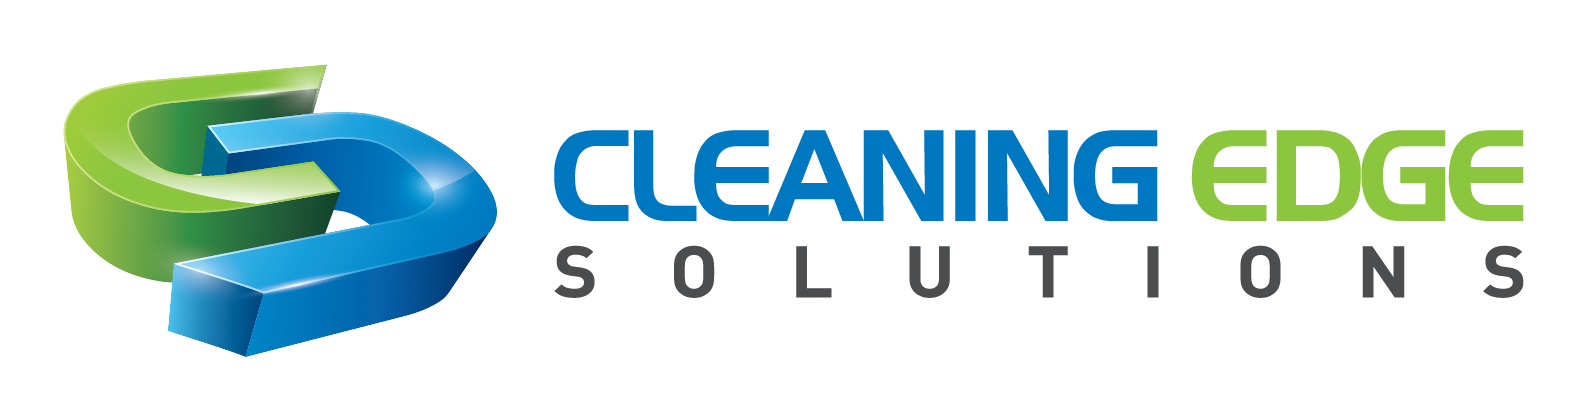 Cleaning Edge Solutions Logo